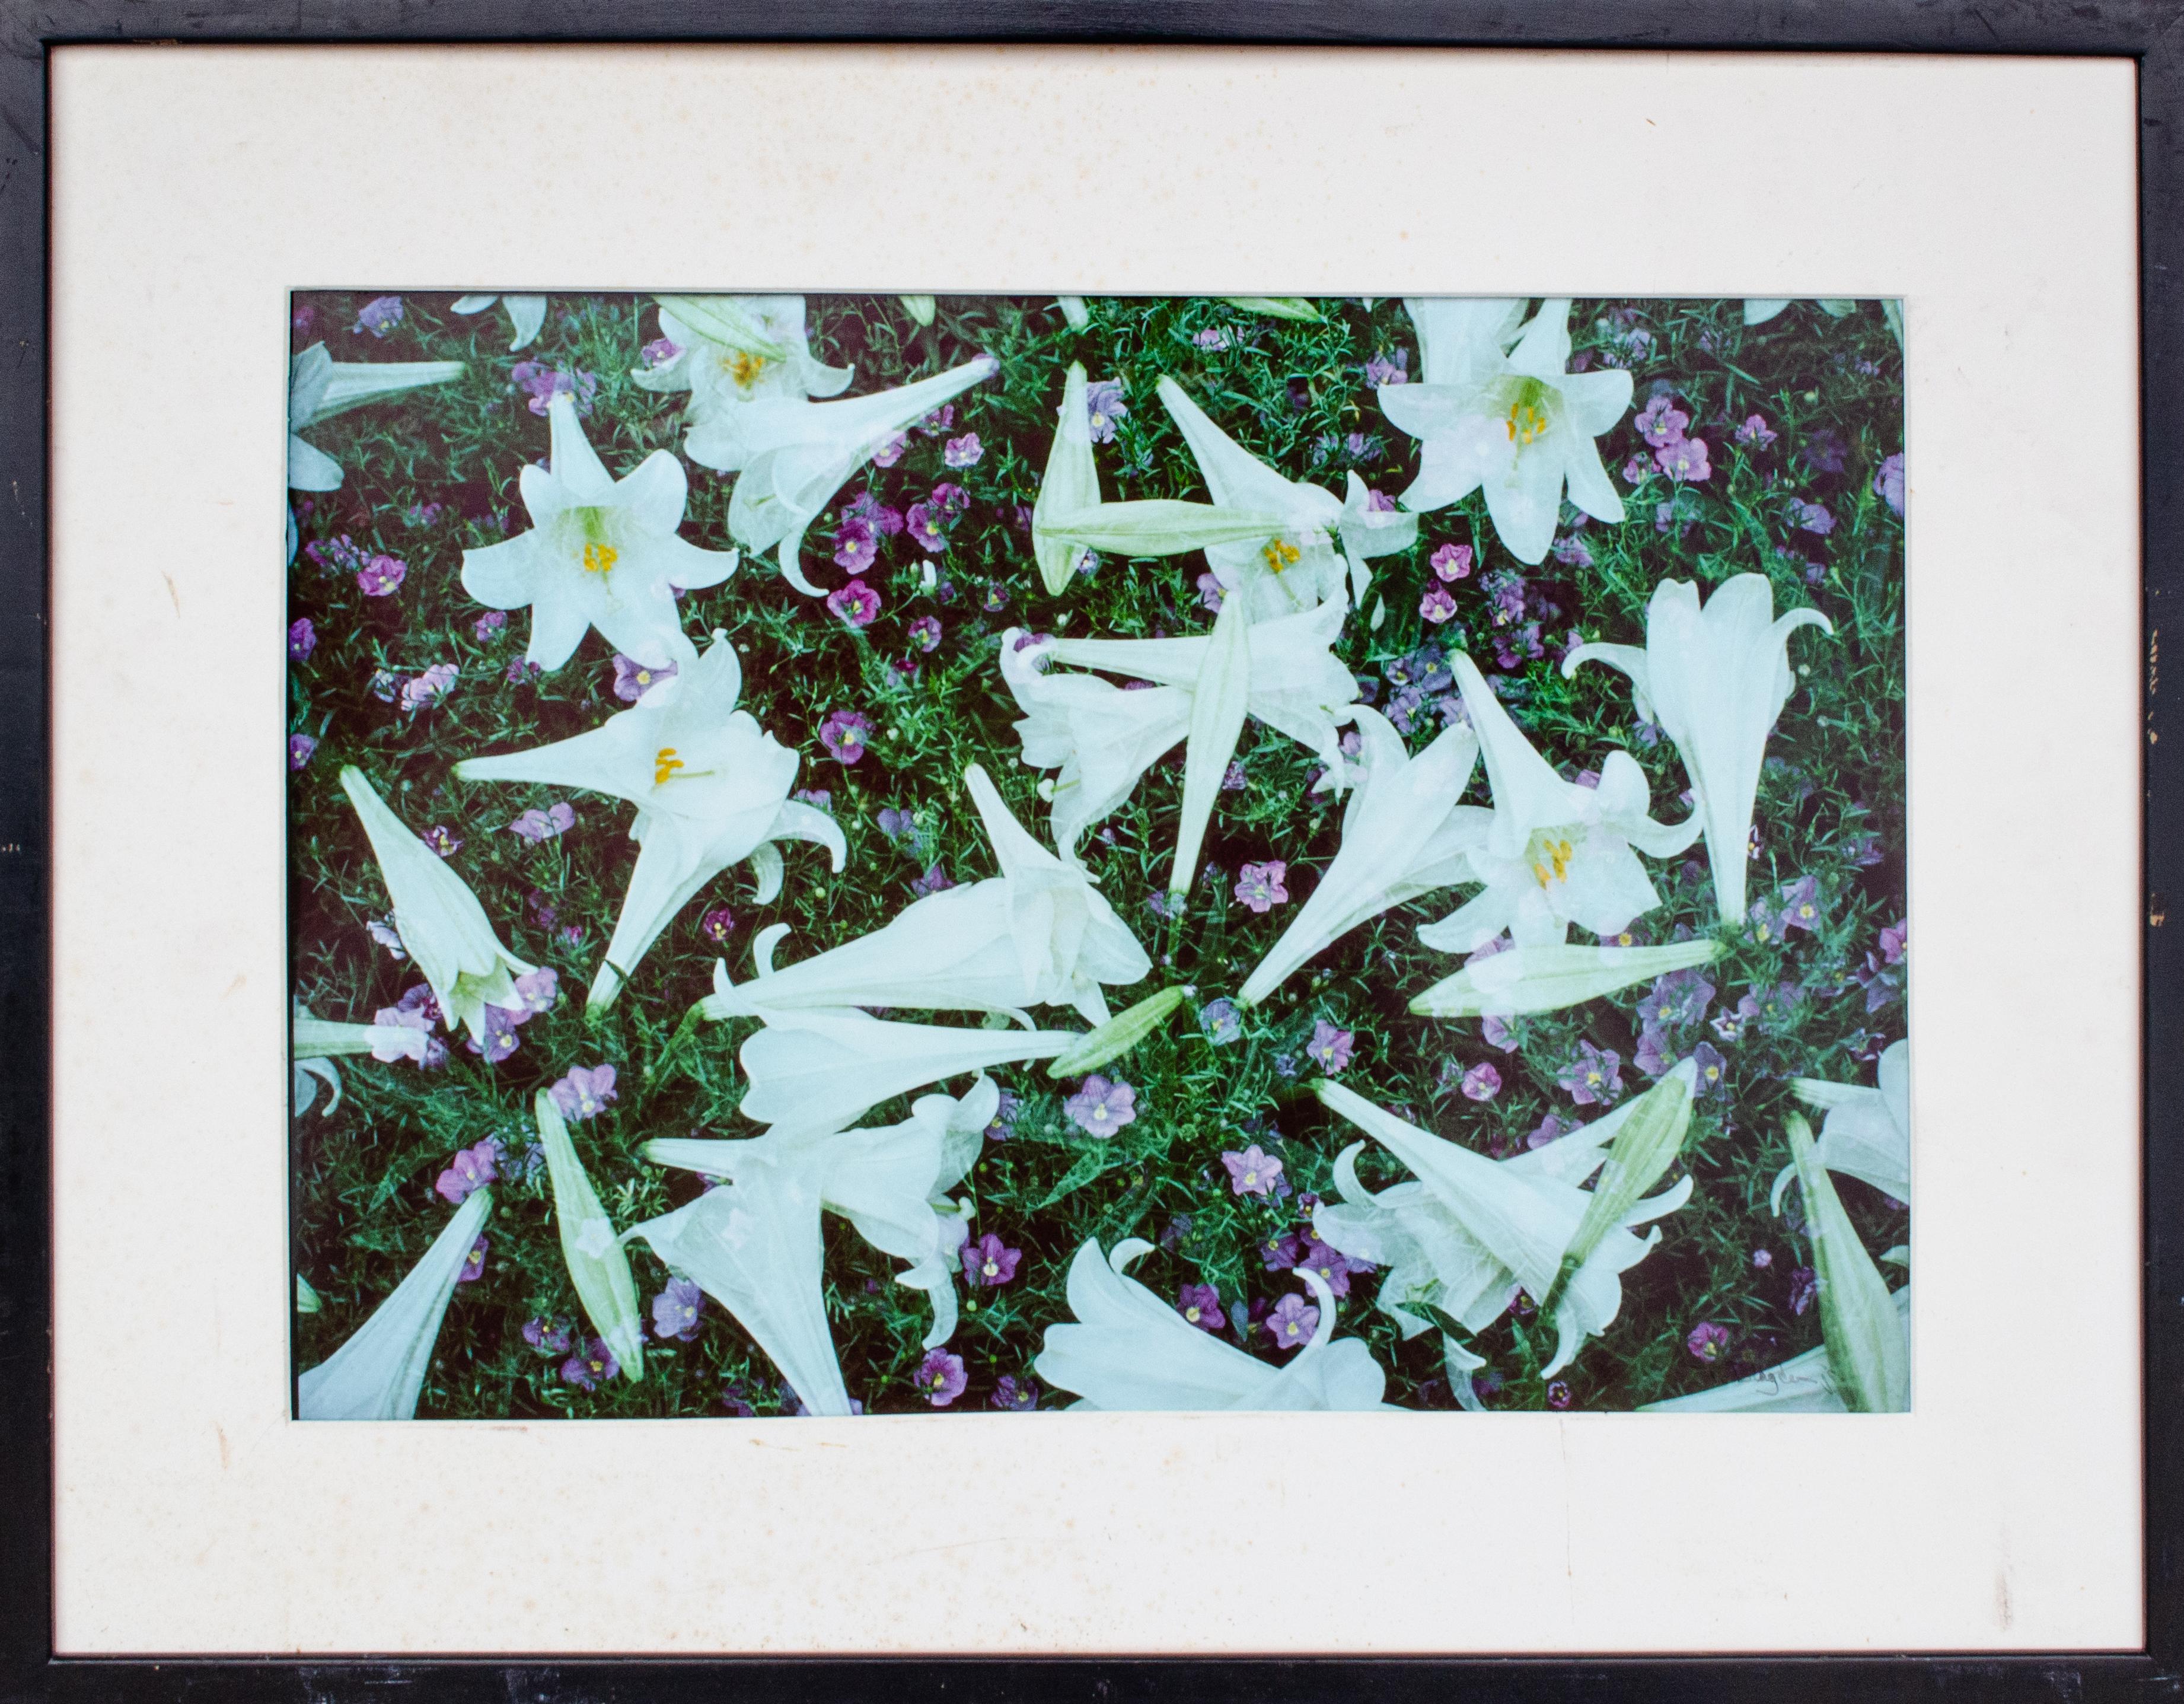 Thomas Blagden Jr. 
Lillies, c. 20th/21st Century
Photograph
Sight: 13 1/4 x 19 in.
Framed: 20 1/8 x 26 1/4 x 1 3/8 in.
Signed lower right: Blagden Jr.
Titled verso

For over four decades Thomas Blagden’s photography has always been more about